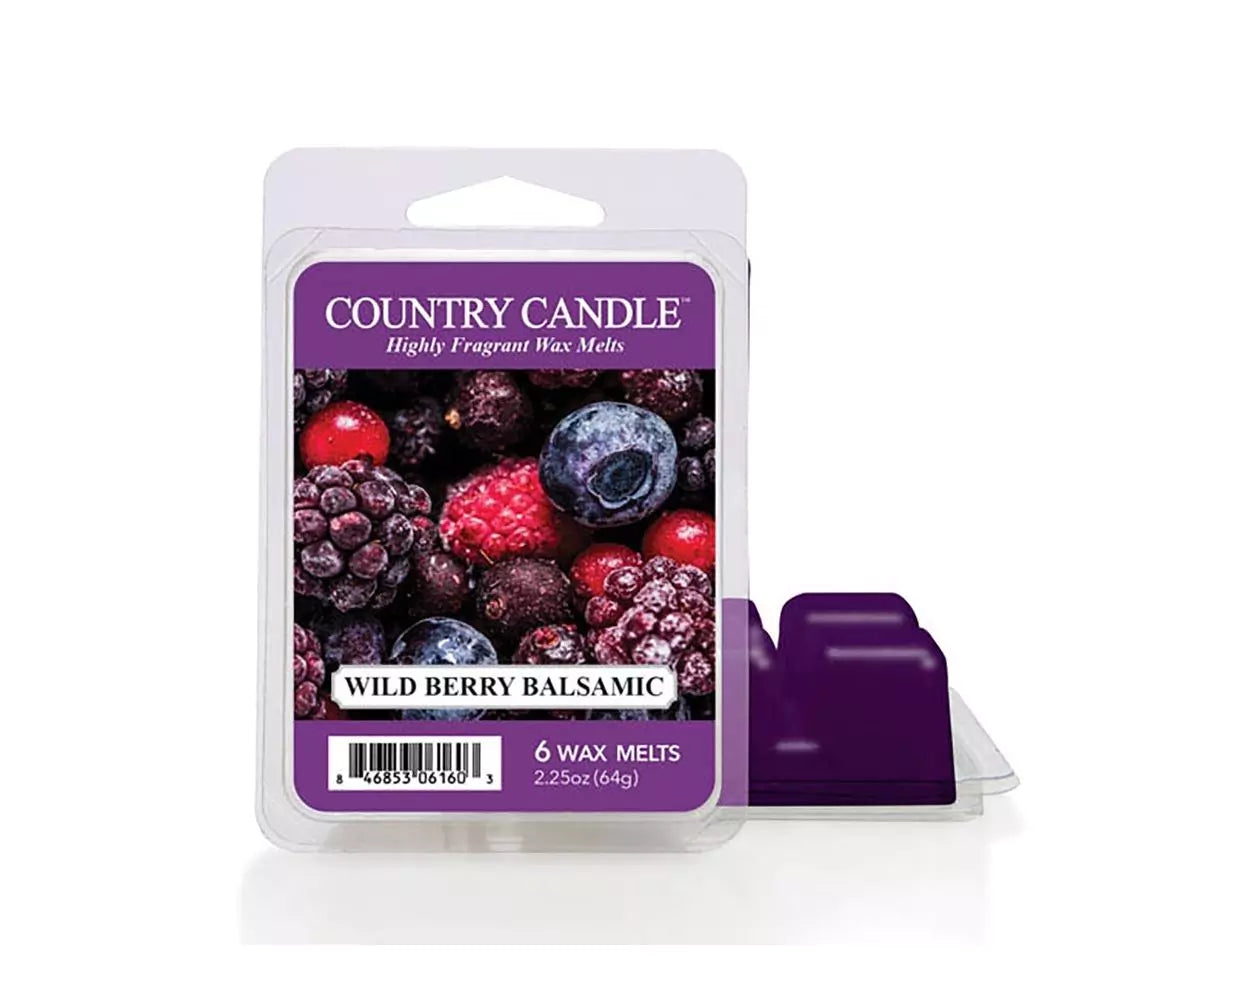 Country Candle Wax Melts Wild Berry Balsamic